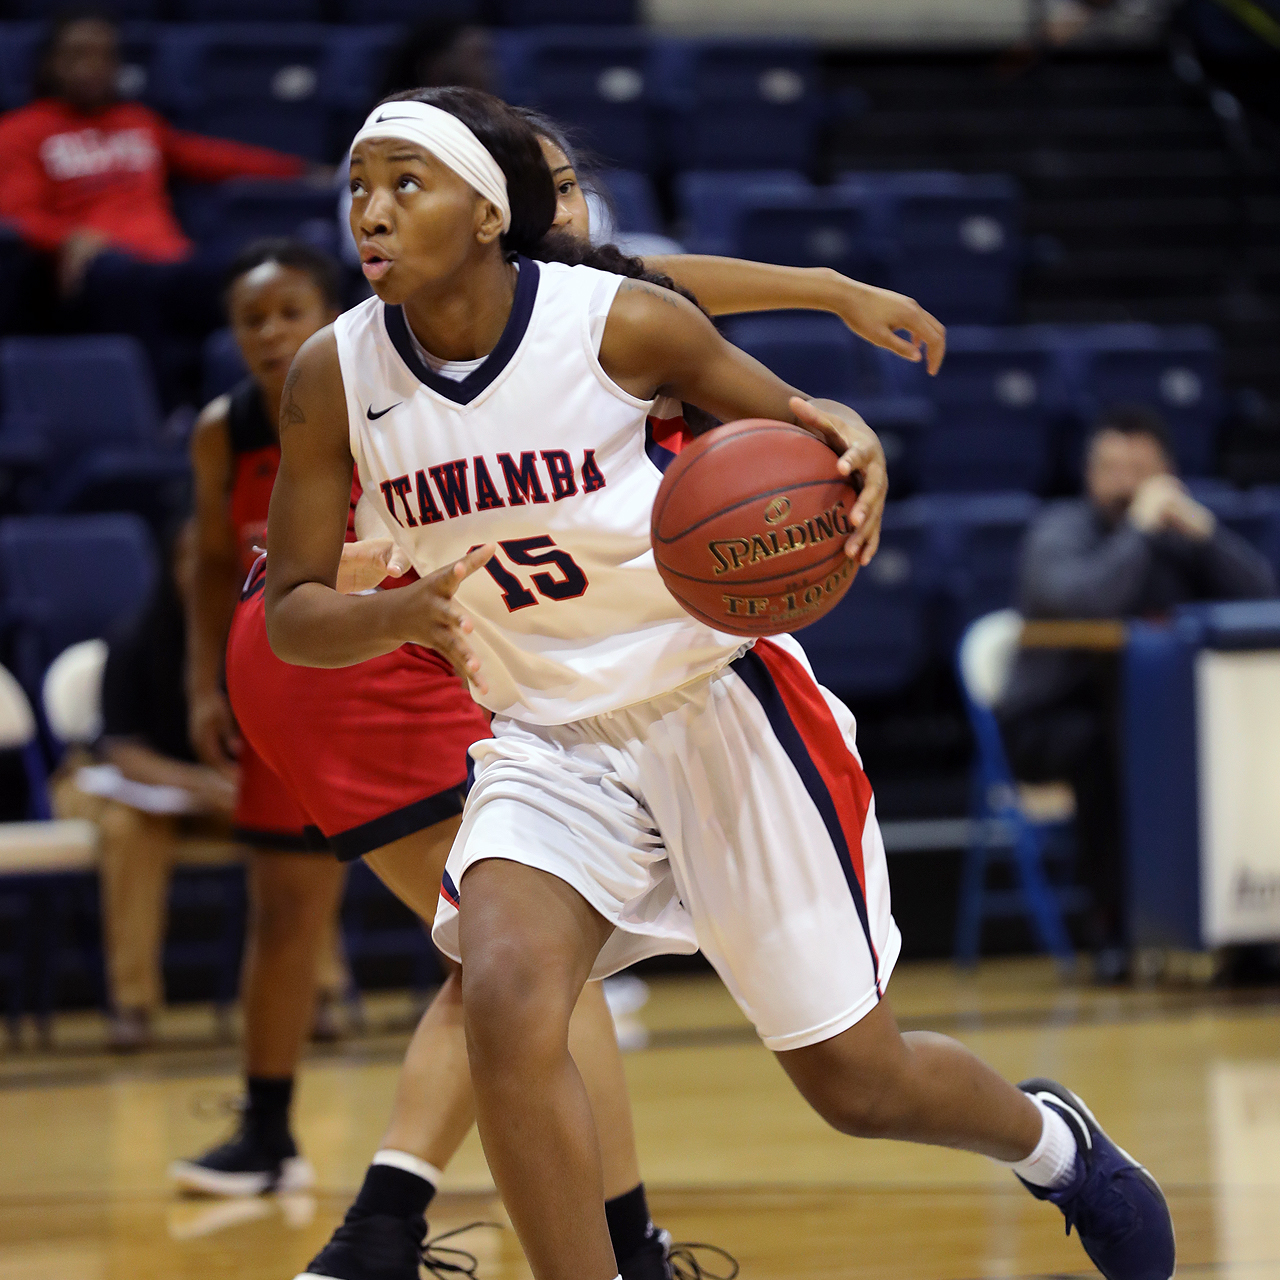 Strong second half leads Lady Indians to win at Snead State